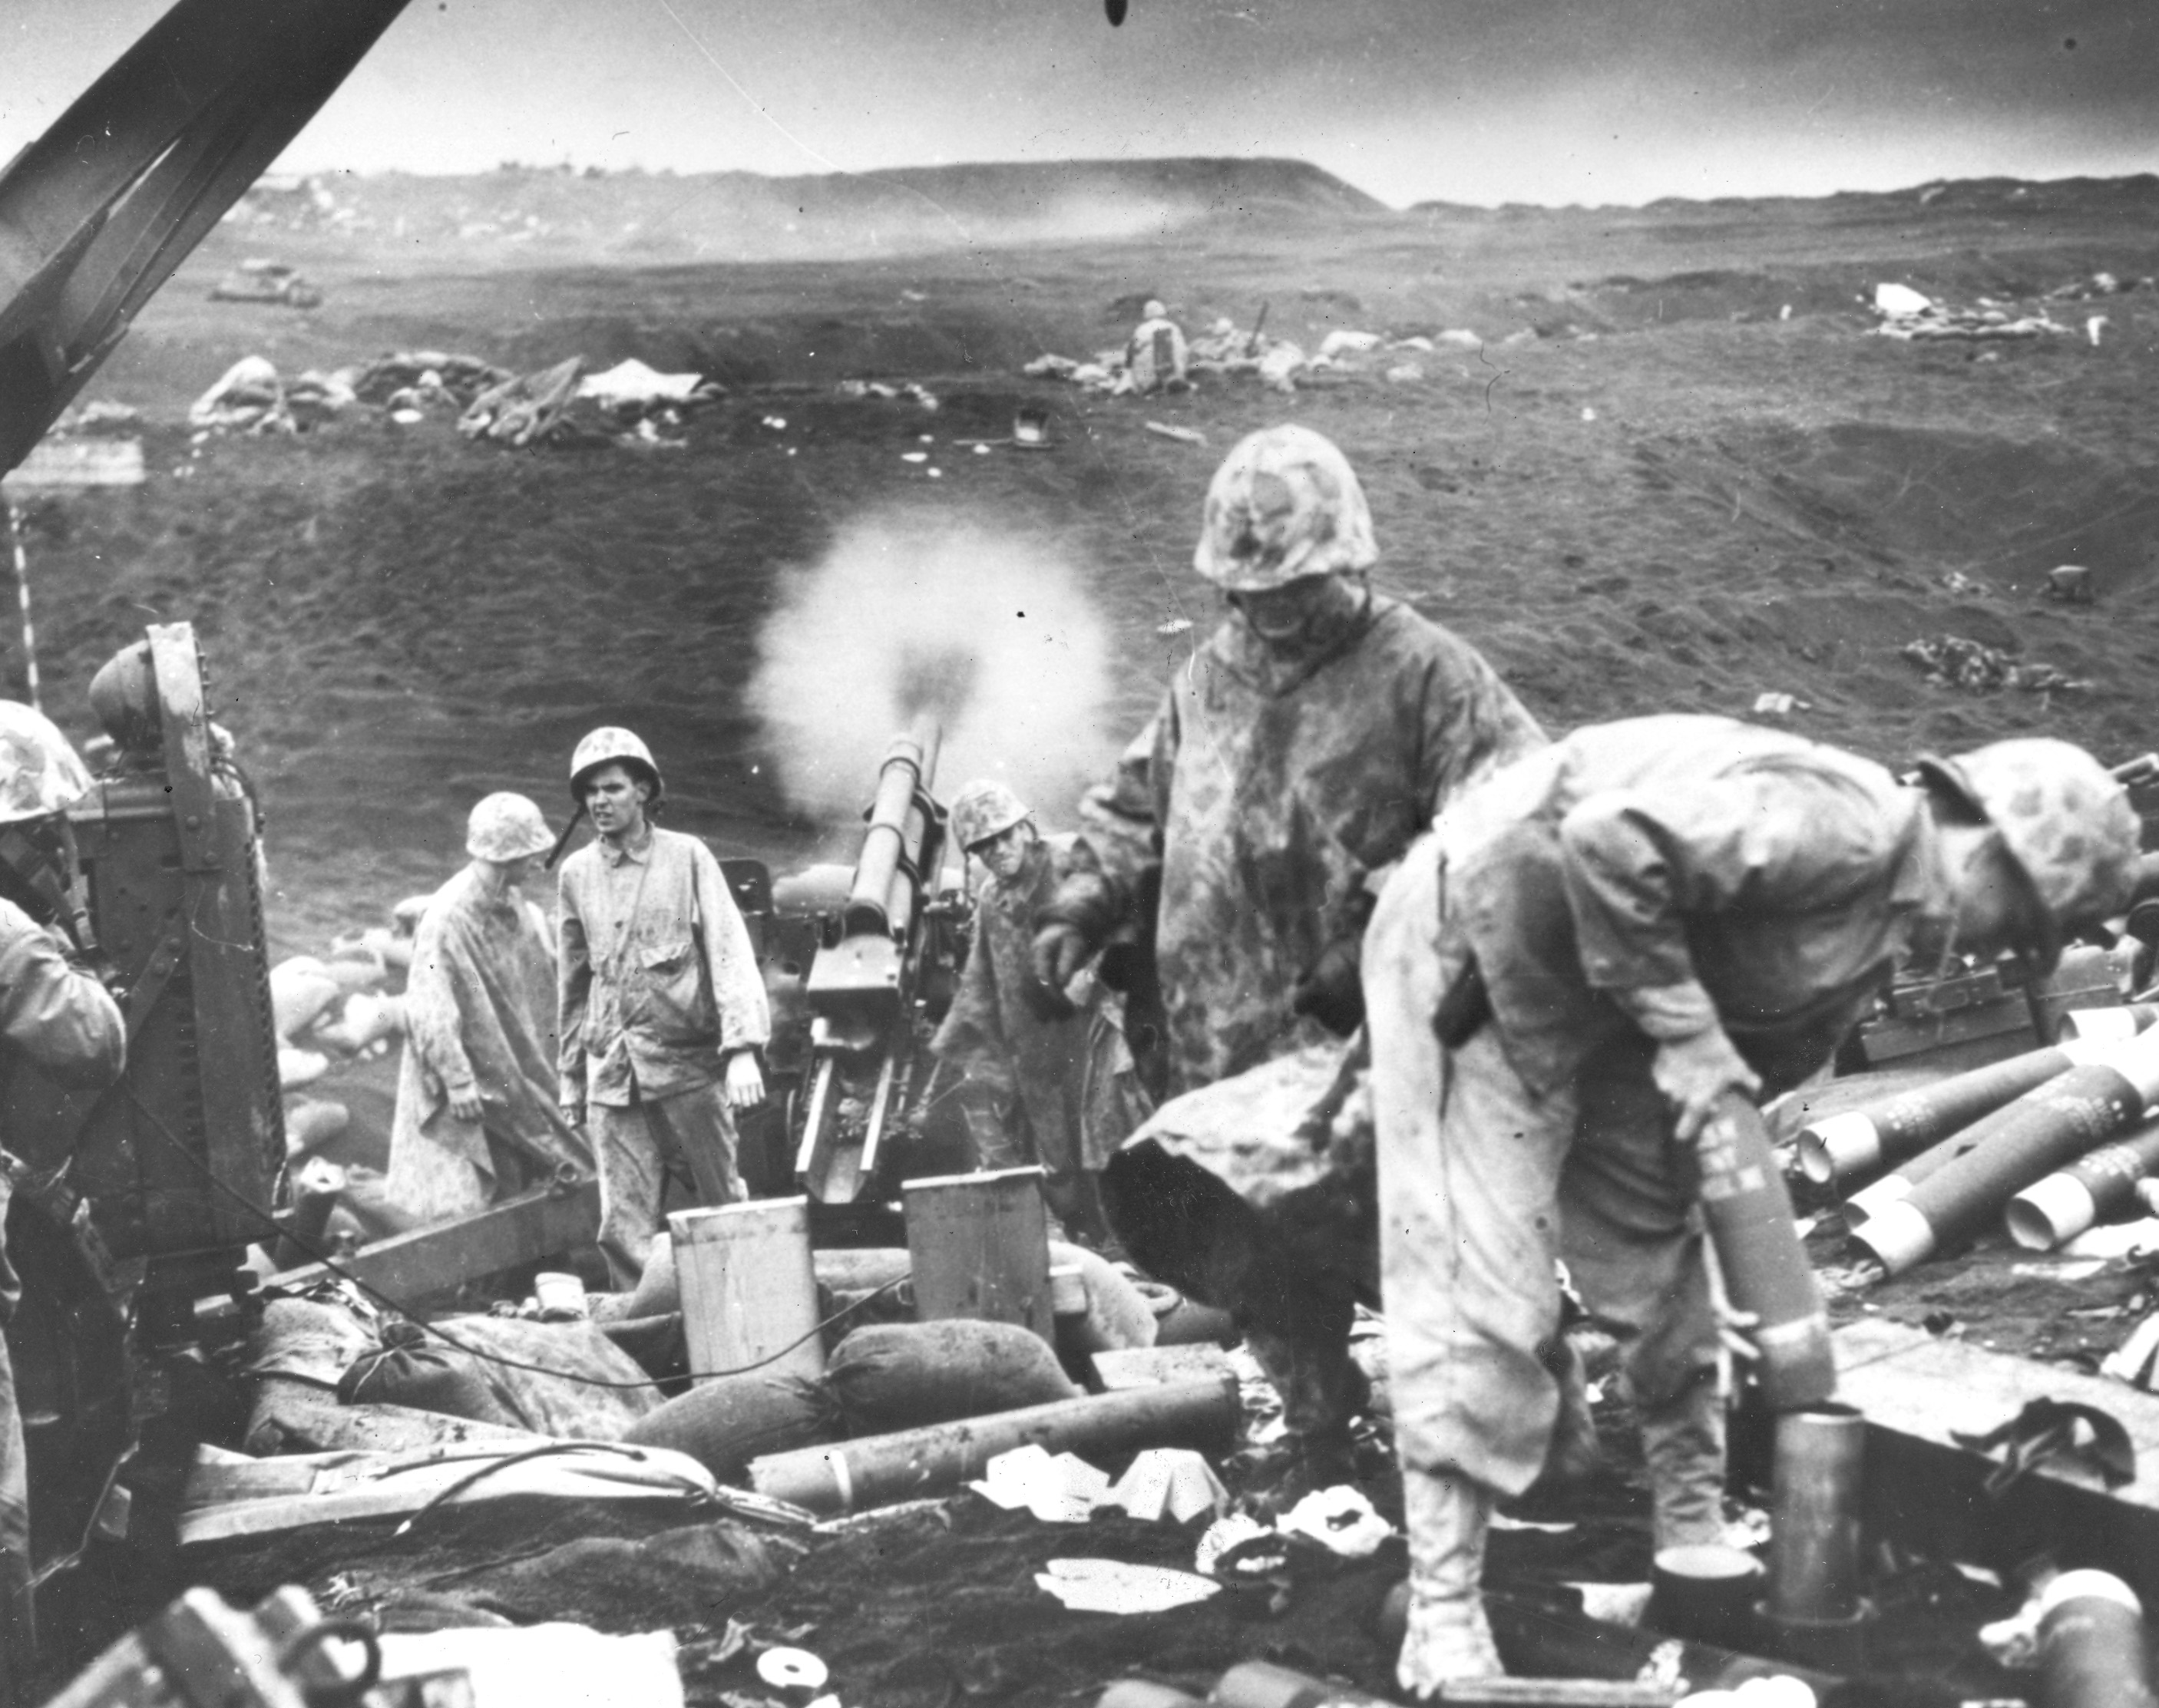 In for One Hell of a Time': Bloody Sacrifice at the Battle of Iwo Jima